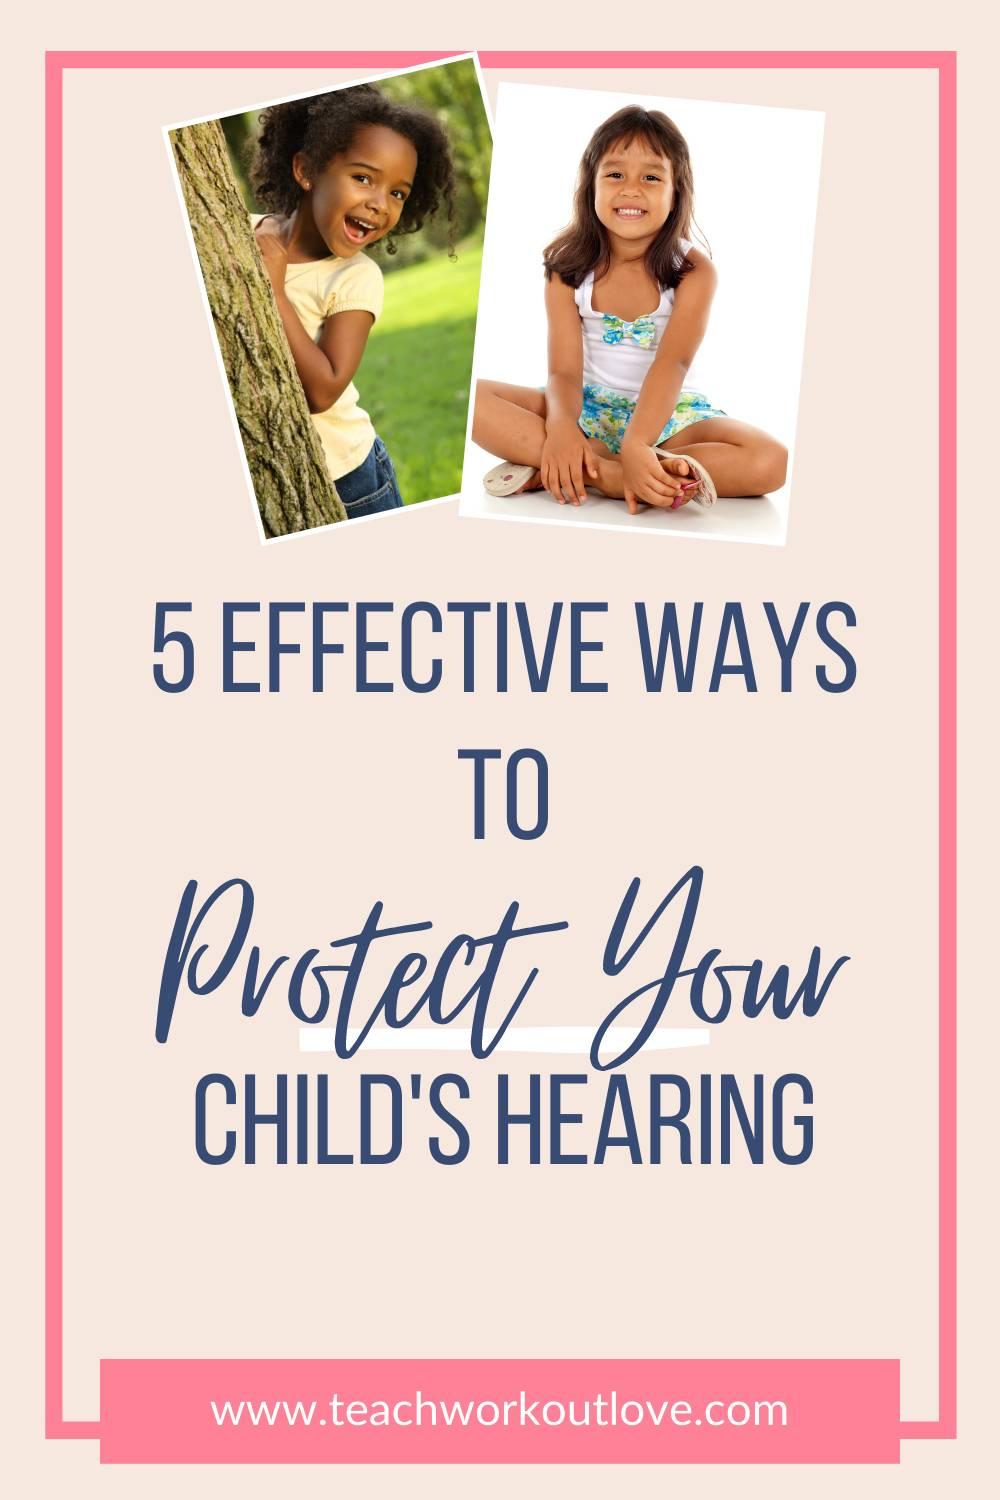 As a parent, it’s important to be mindful of your child’s hearing, and to teach them to do the same. Here's what to do: